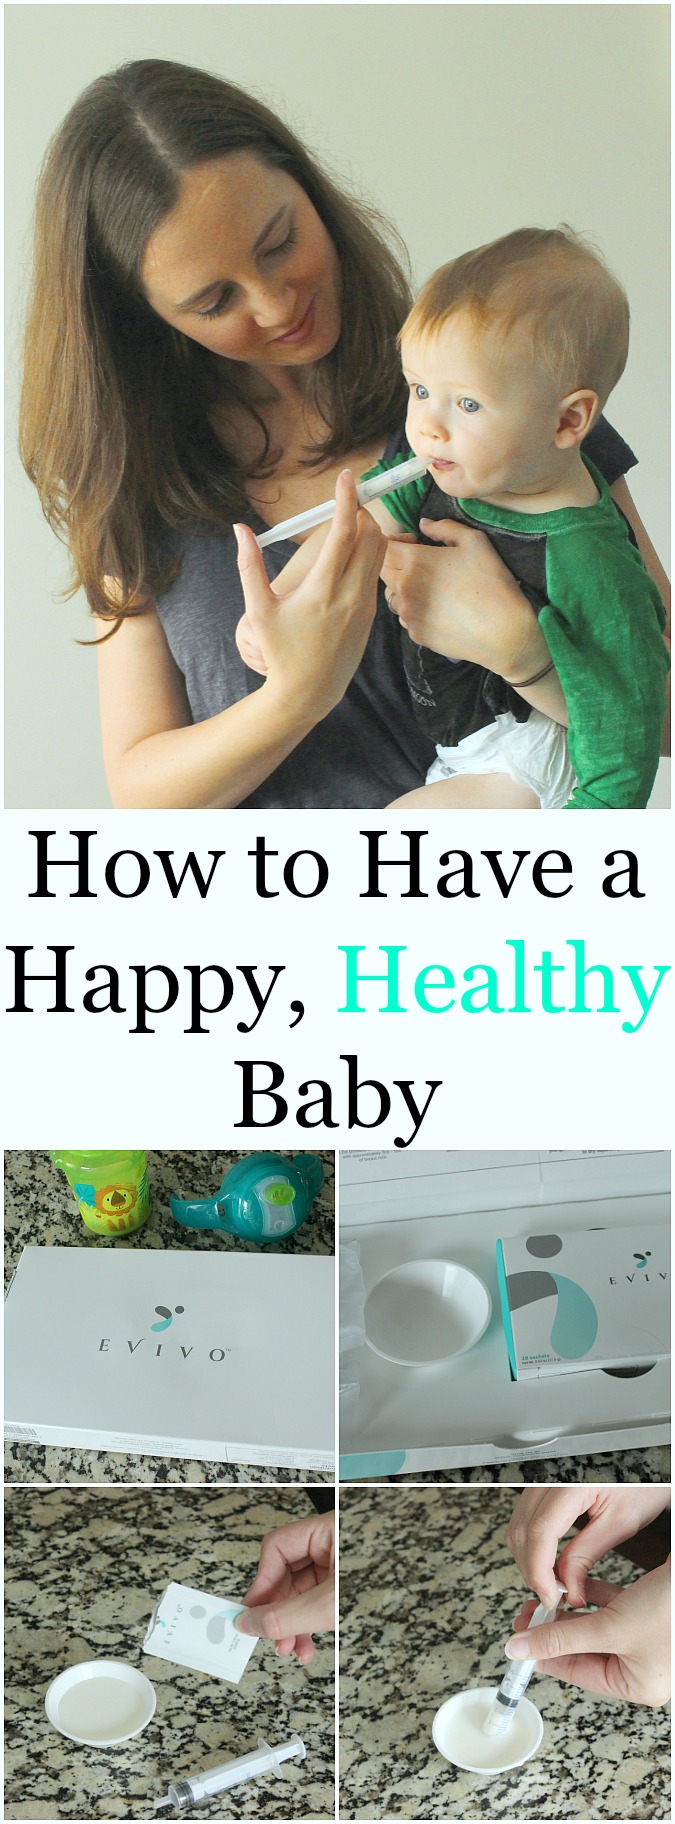 How to Keep baby Healthy and Happy